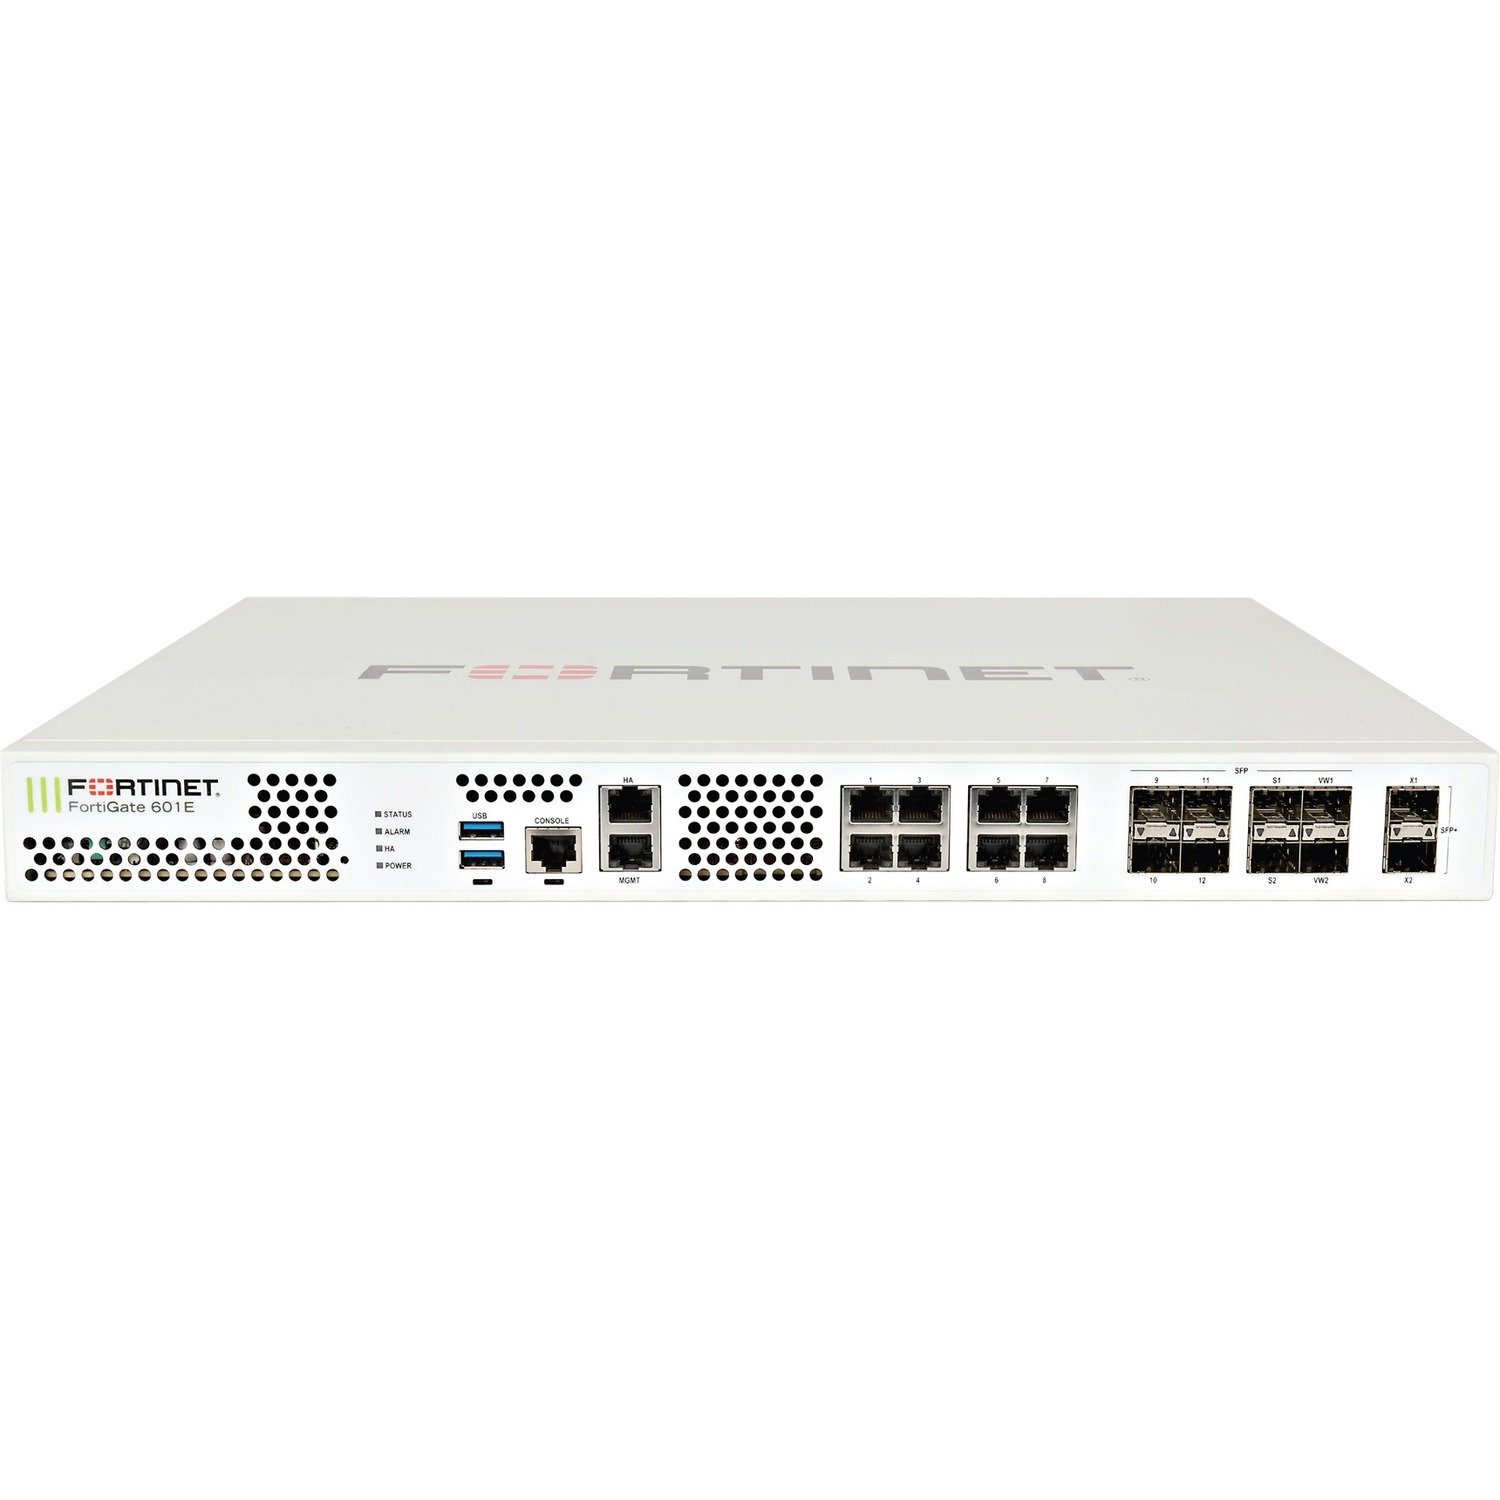 2 x 10GE SFP+ slots, 10 x GE RJ45 ports (including 1 x MGMT port, 1 X HA port, 8 x switch ports), 8 x GE SFP slots, SPU NP6 and CP9 hardware accelerated, 2x 240GB onboard SSD storage